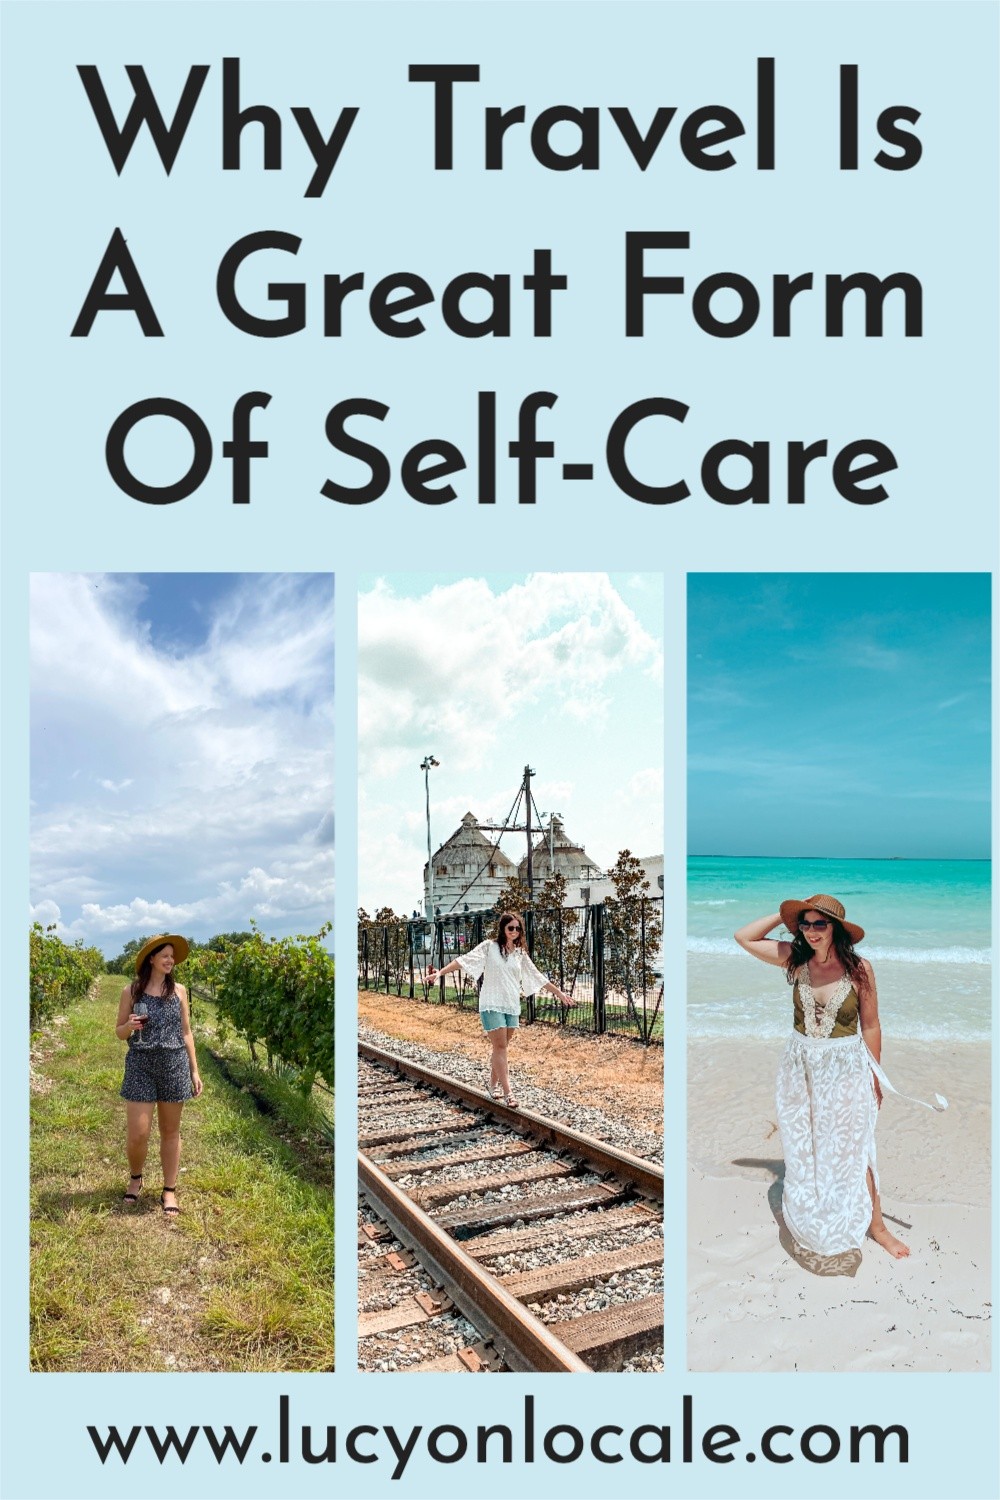 10 Reasons Why Travel Is a Great Form of Self-Care